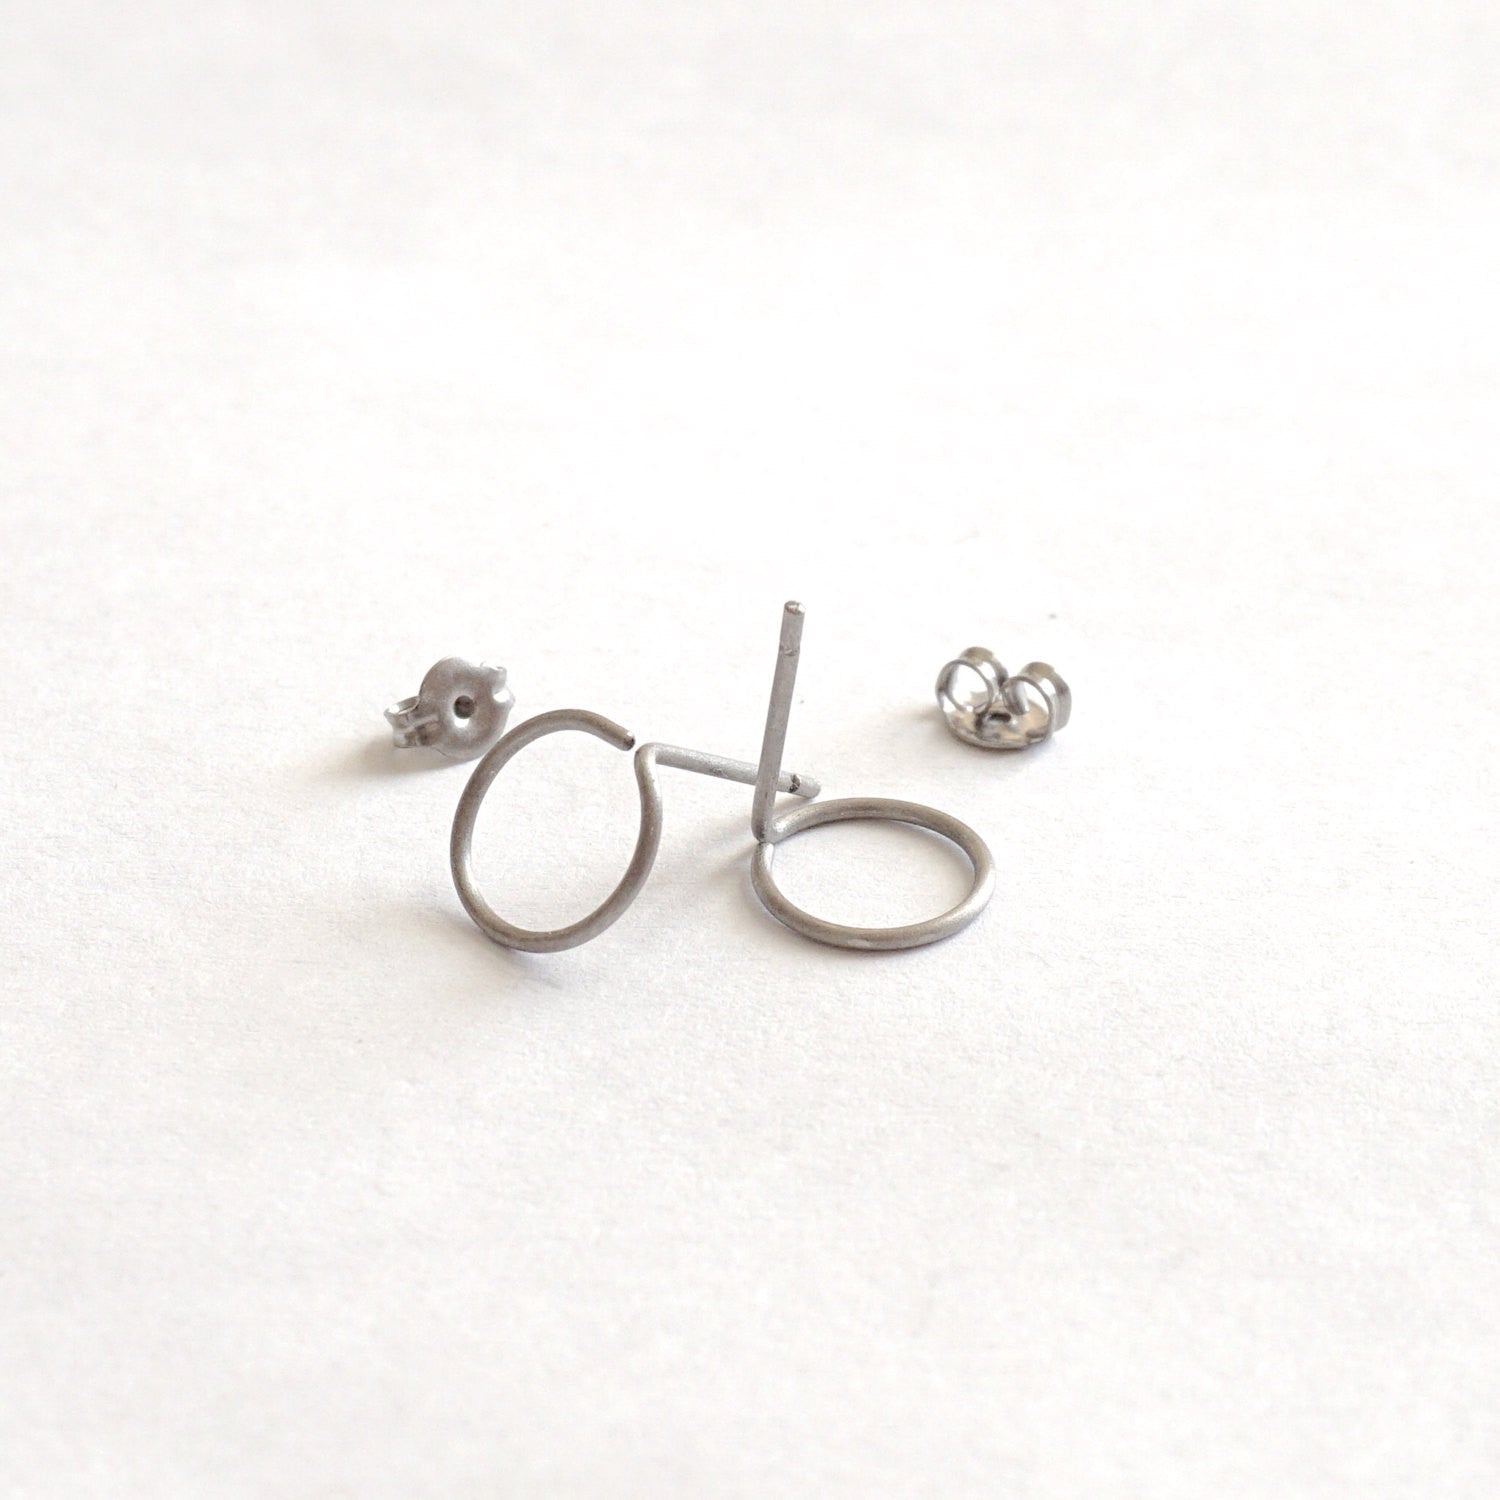 9mm Open Circle Stud Earrings 050 - Patination Design